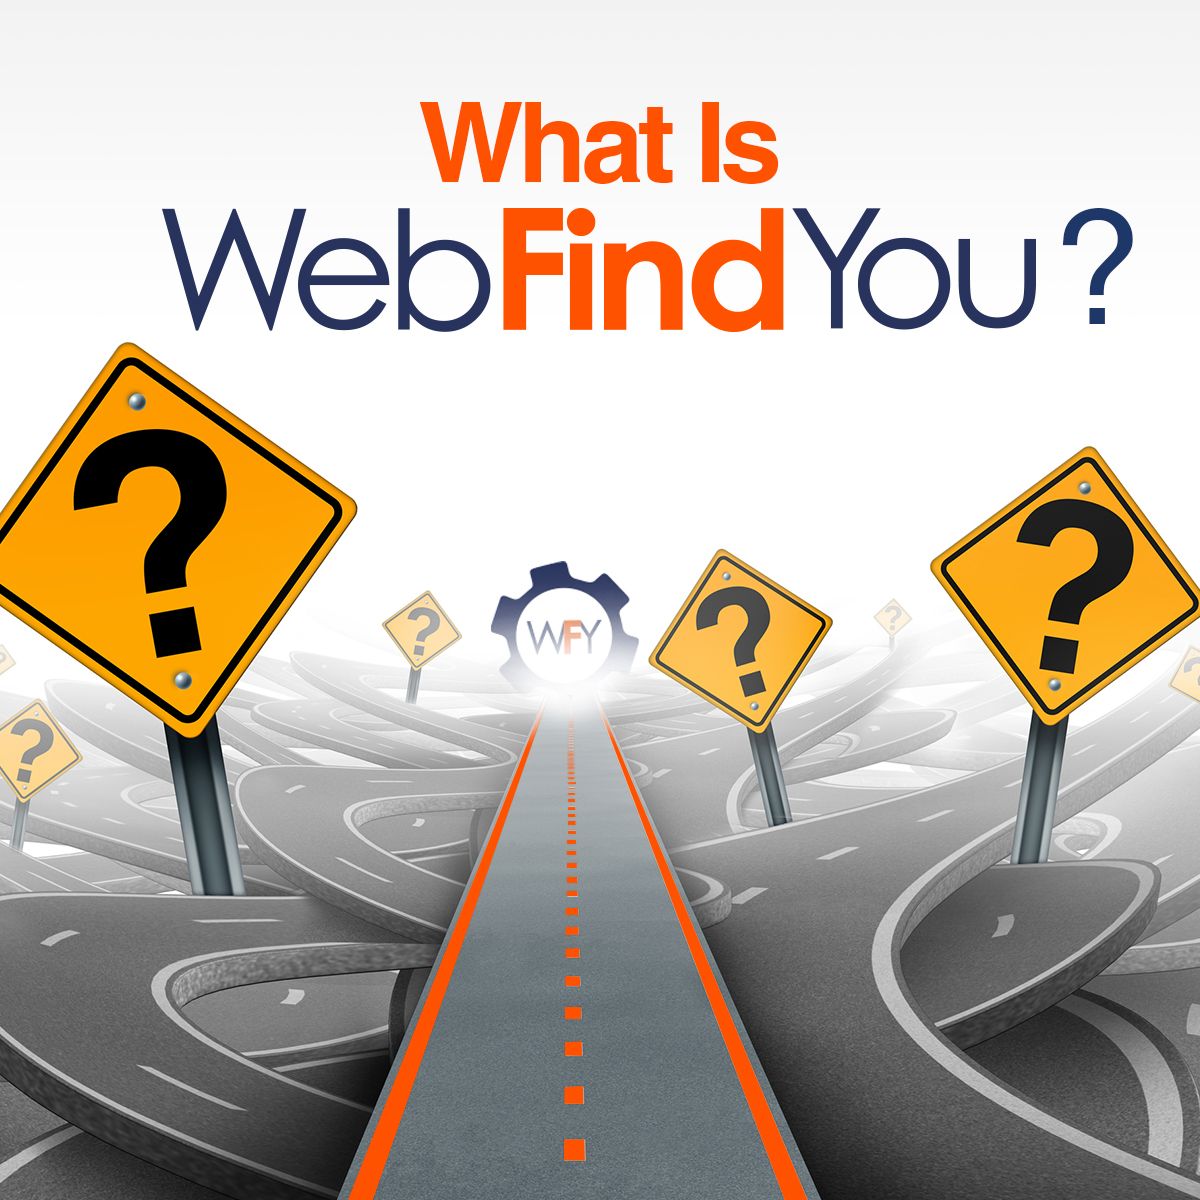 What Is WebFindYou?